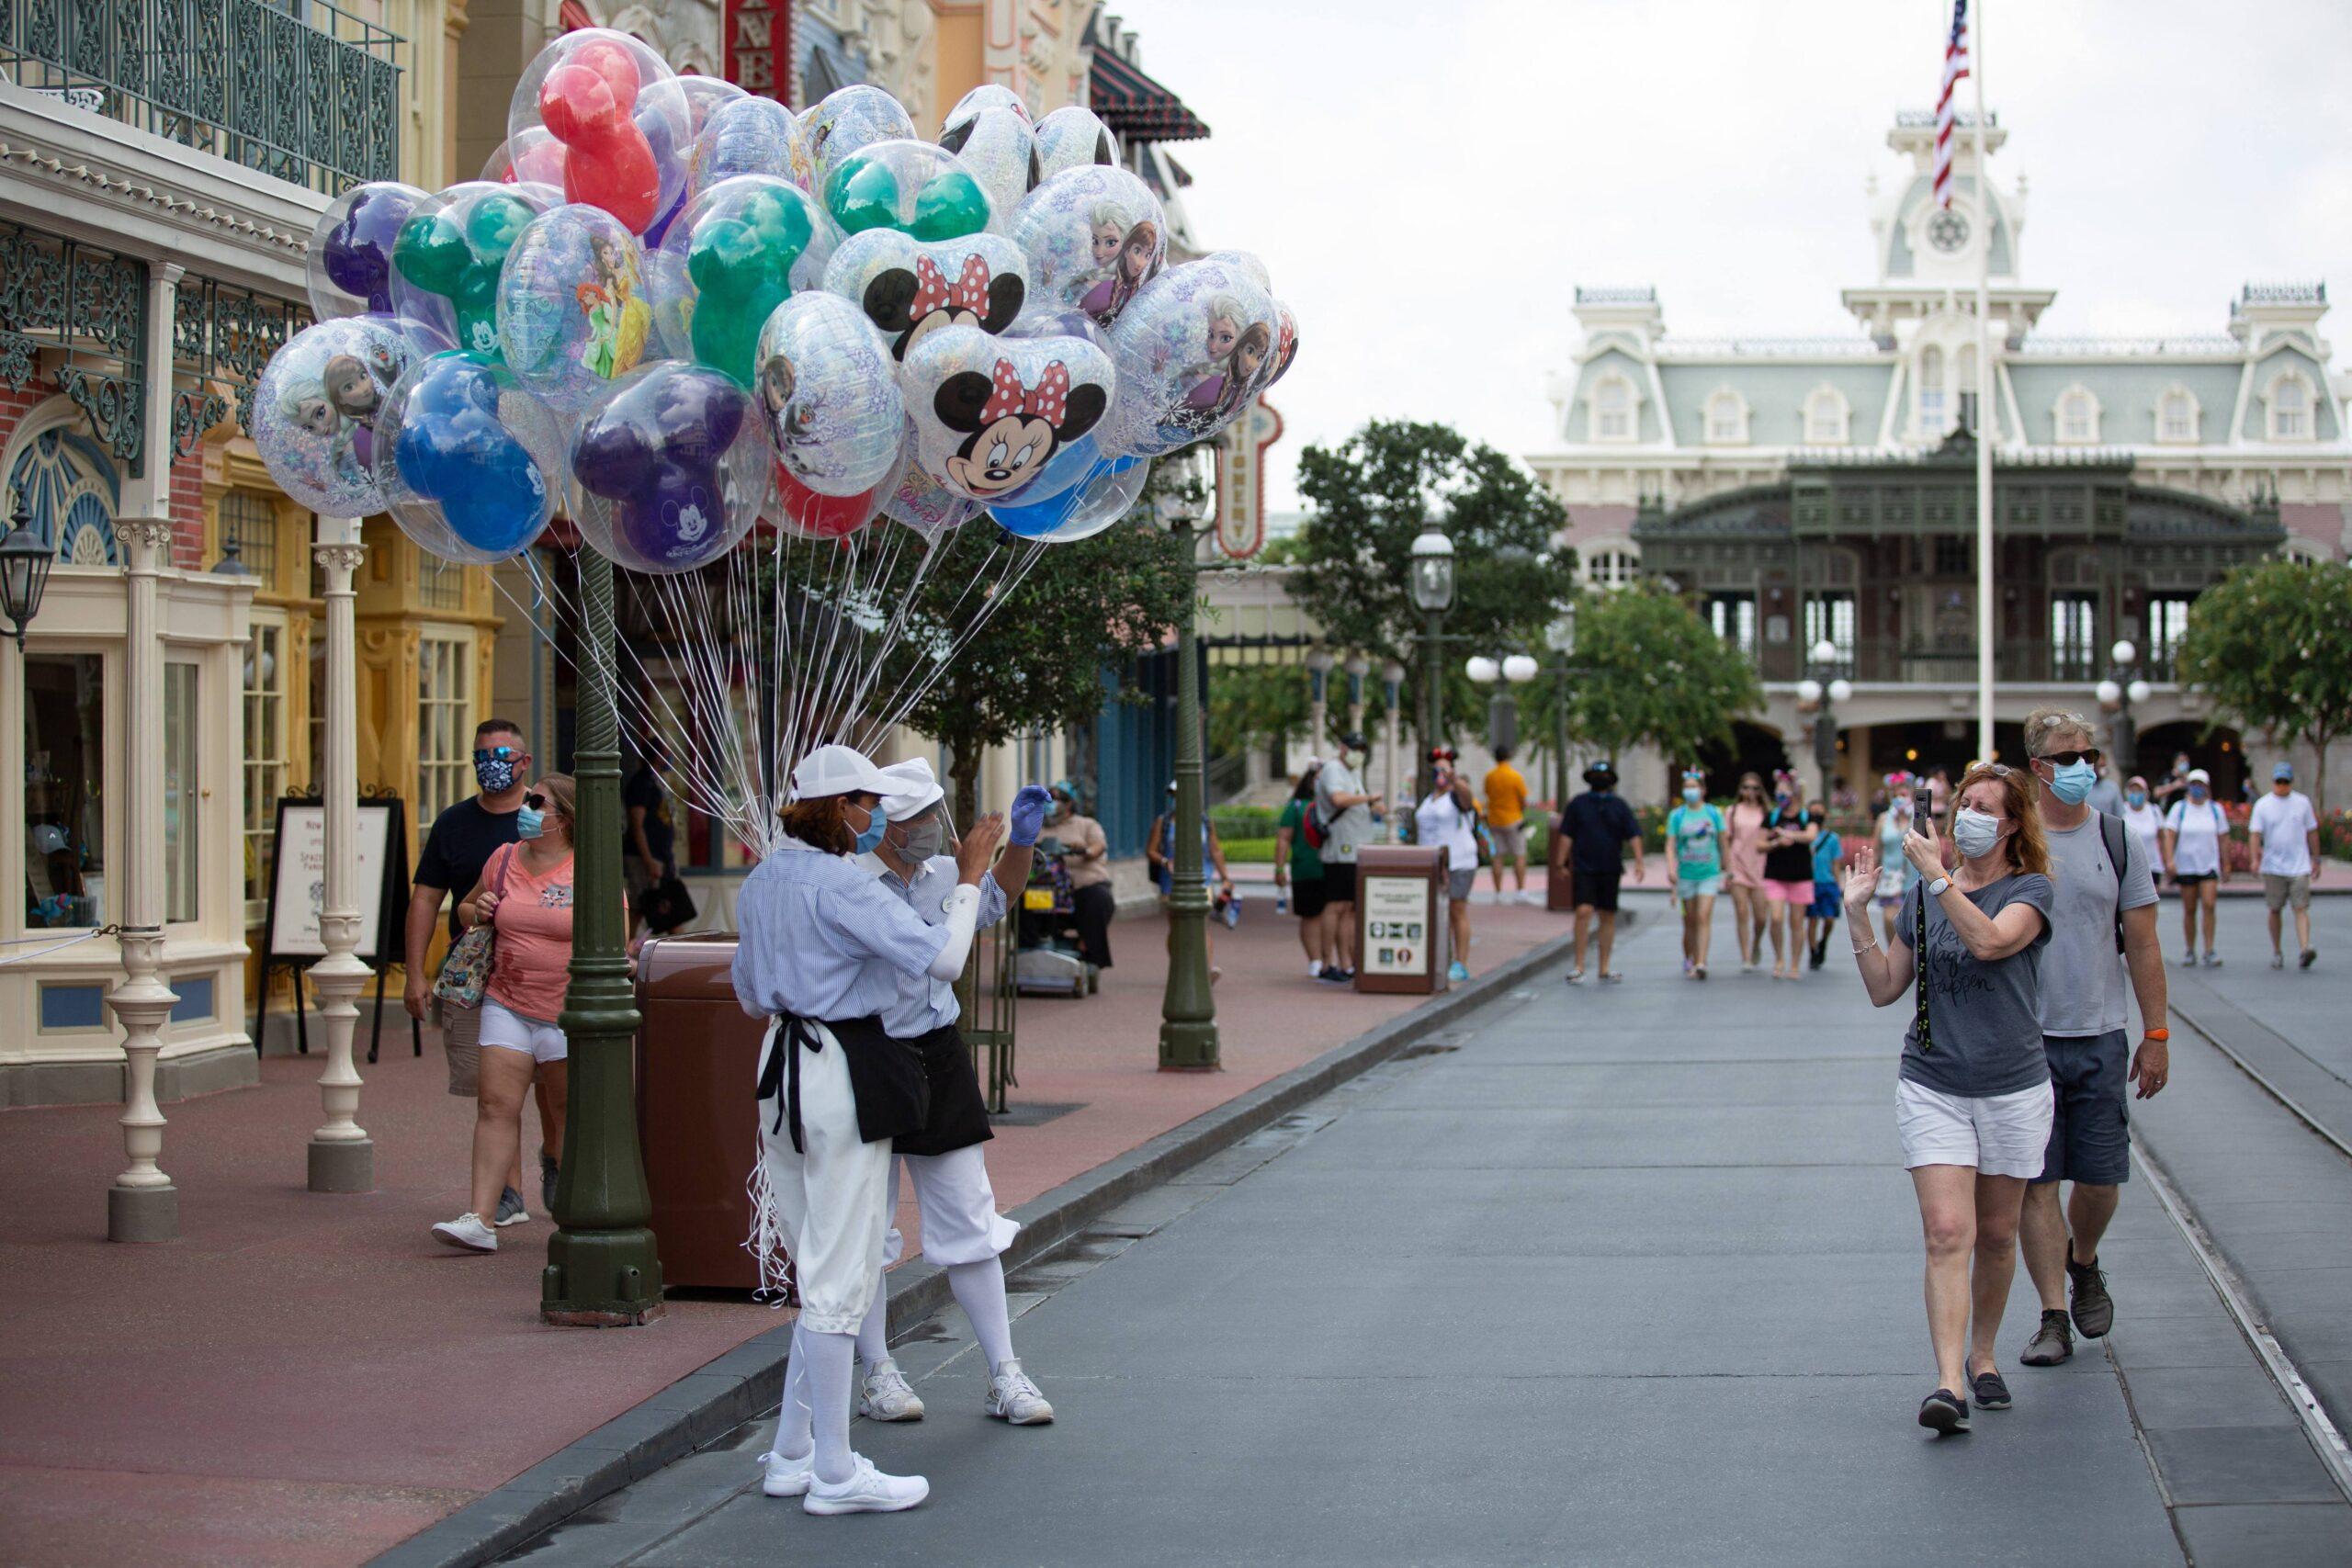 Guest Banned From Disney After Pushing Several Senior Citizens